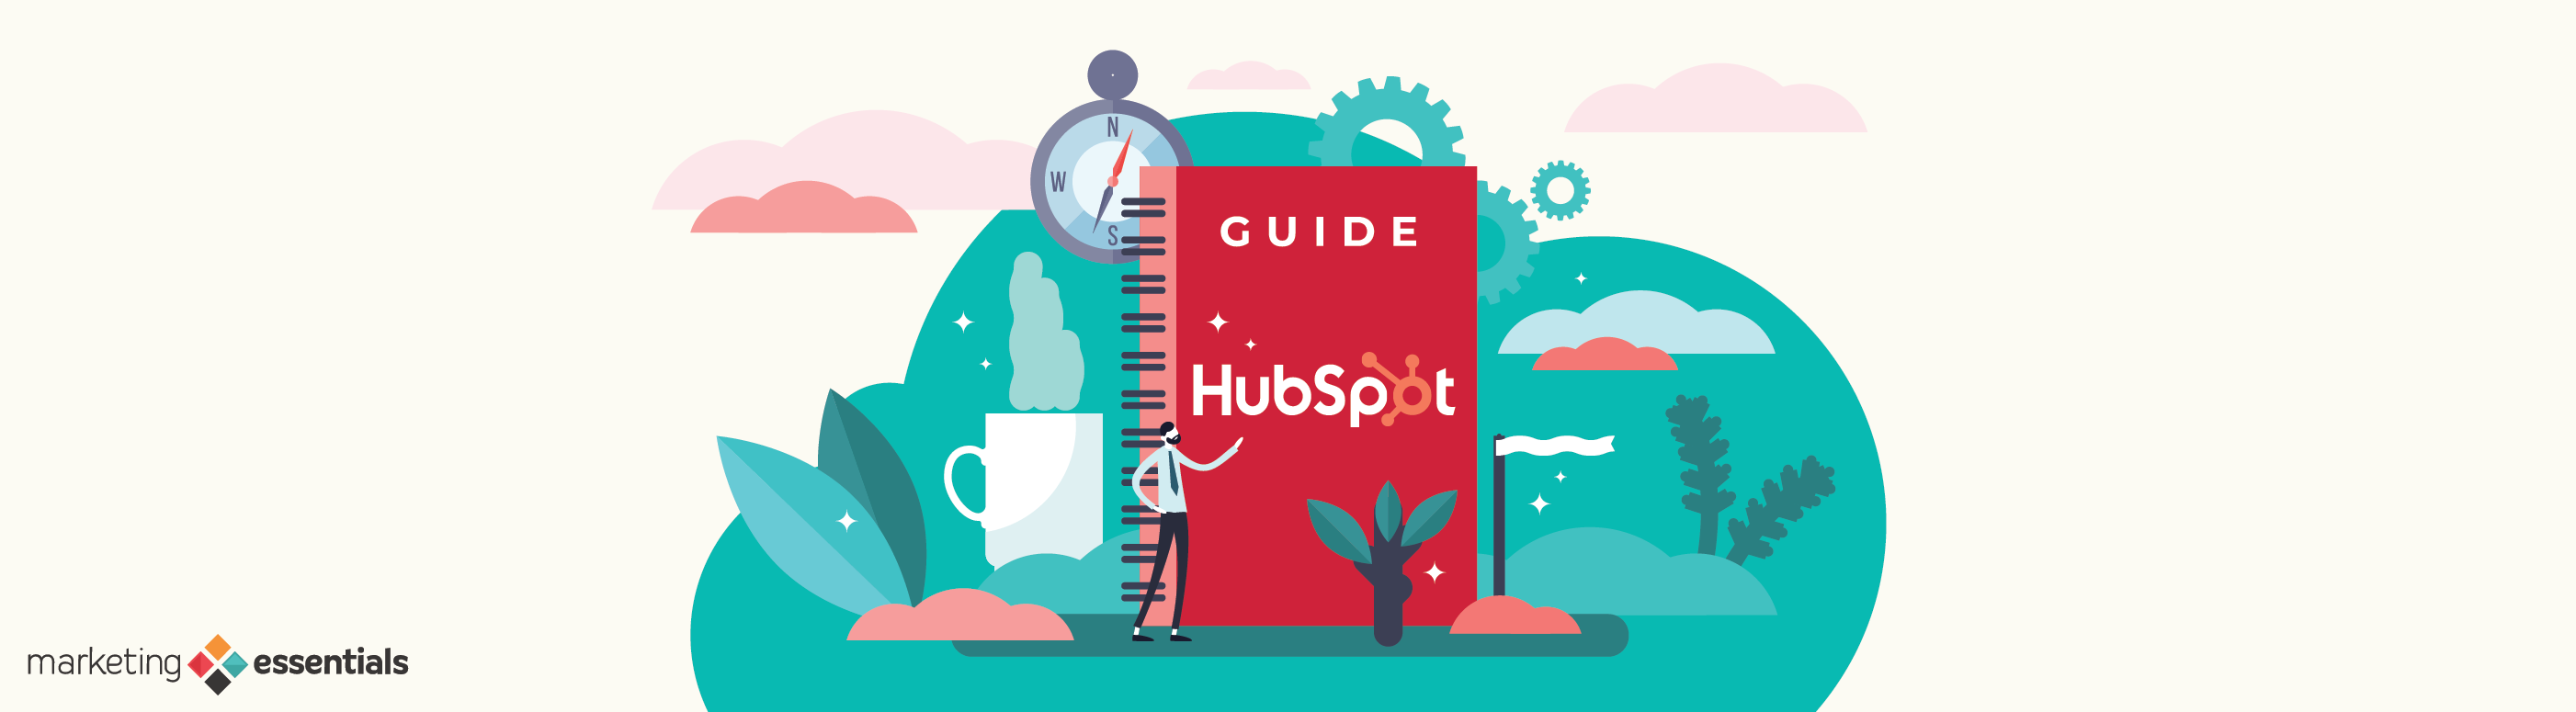 Illustrated HubSpot guide book.